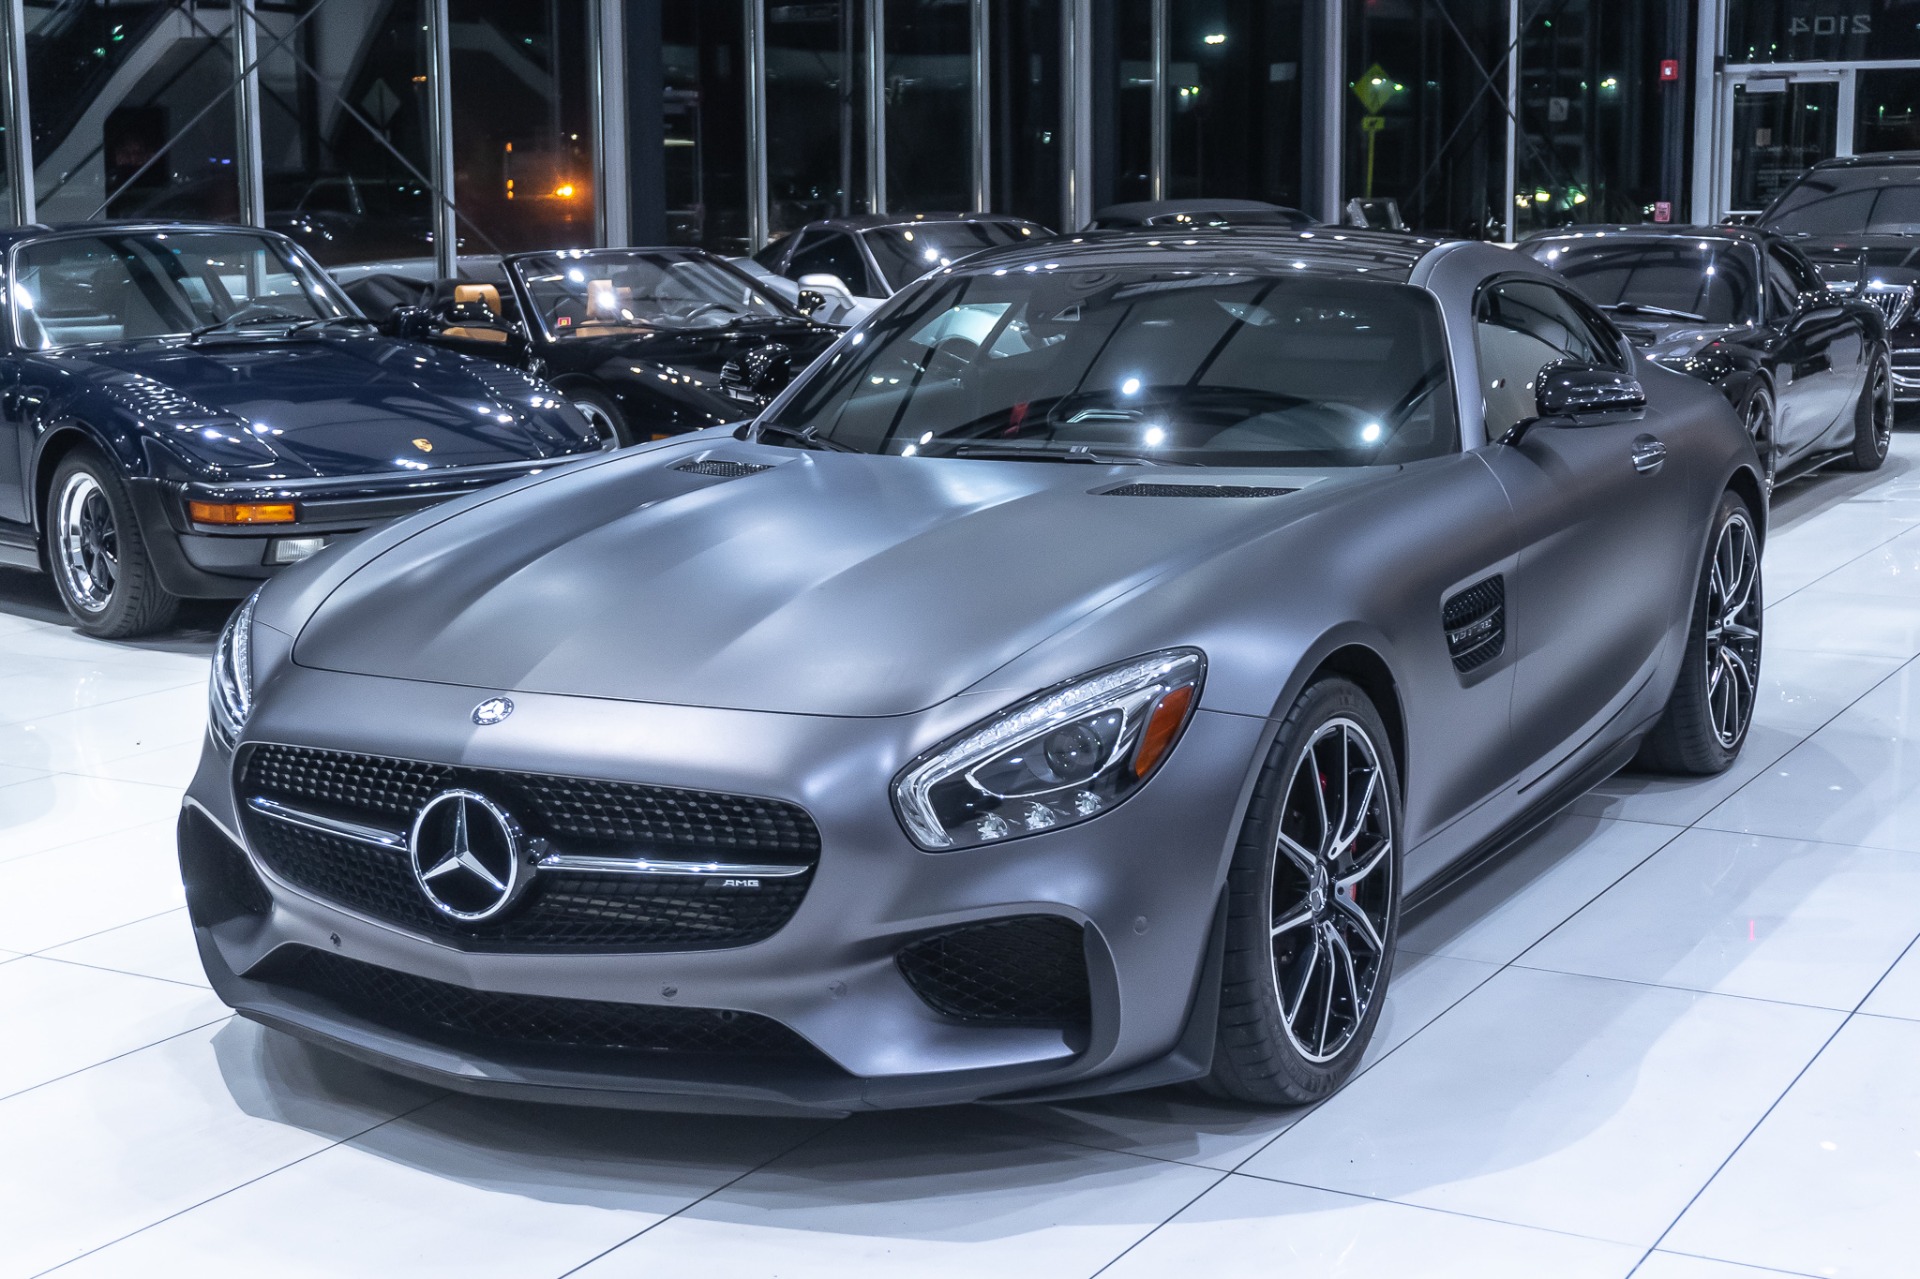 Used-2016-Mercedes-Benz-AMG-GTS-Coupe-Edition-1-Lane-Tracking-Package-Matte-Grey-Wrap